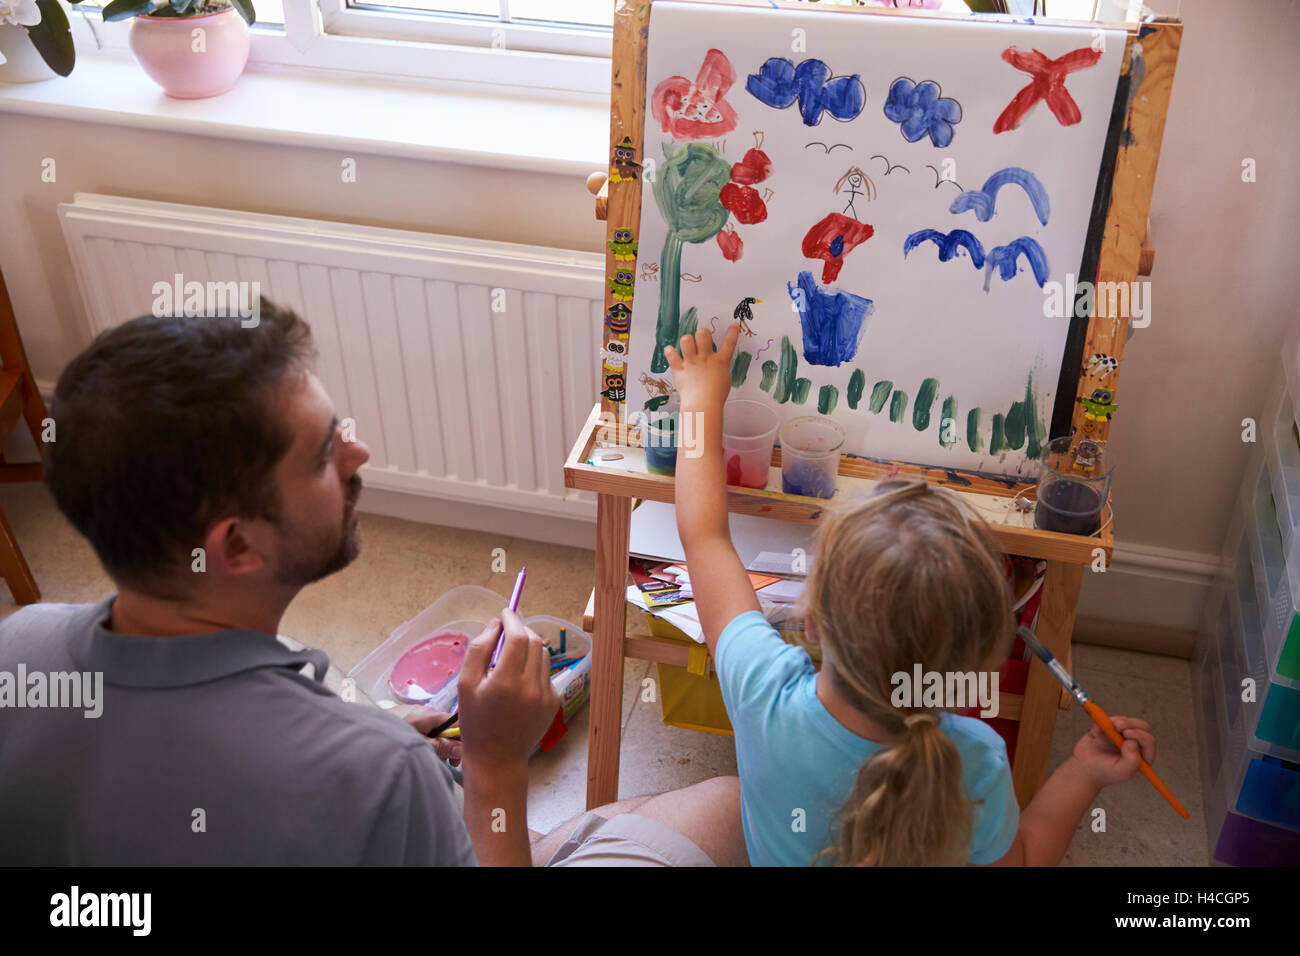 Father And Daughter Painting A Picture At Home Together Stock Photo